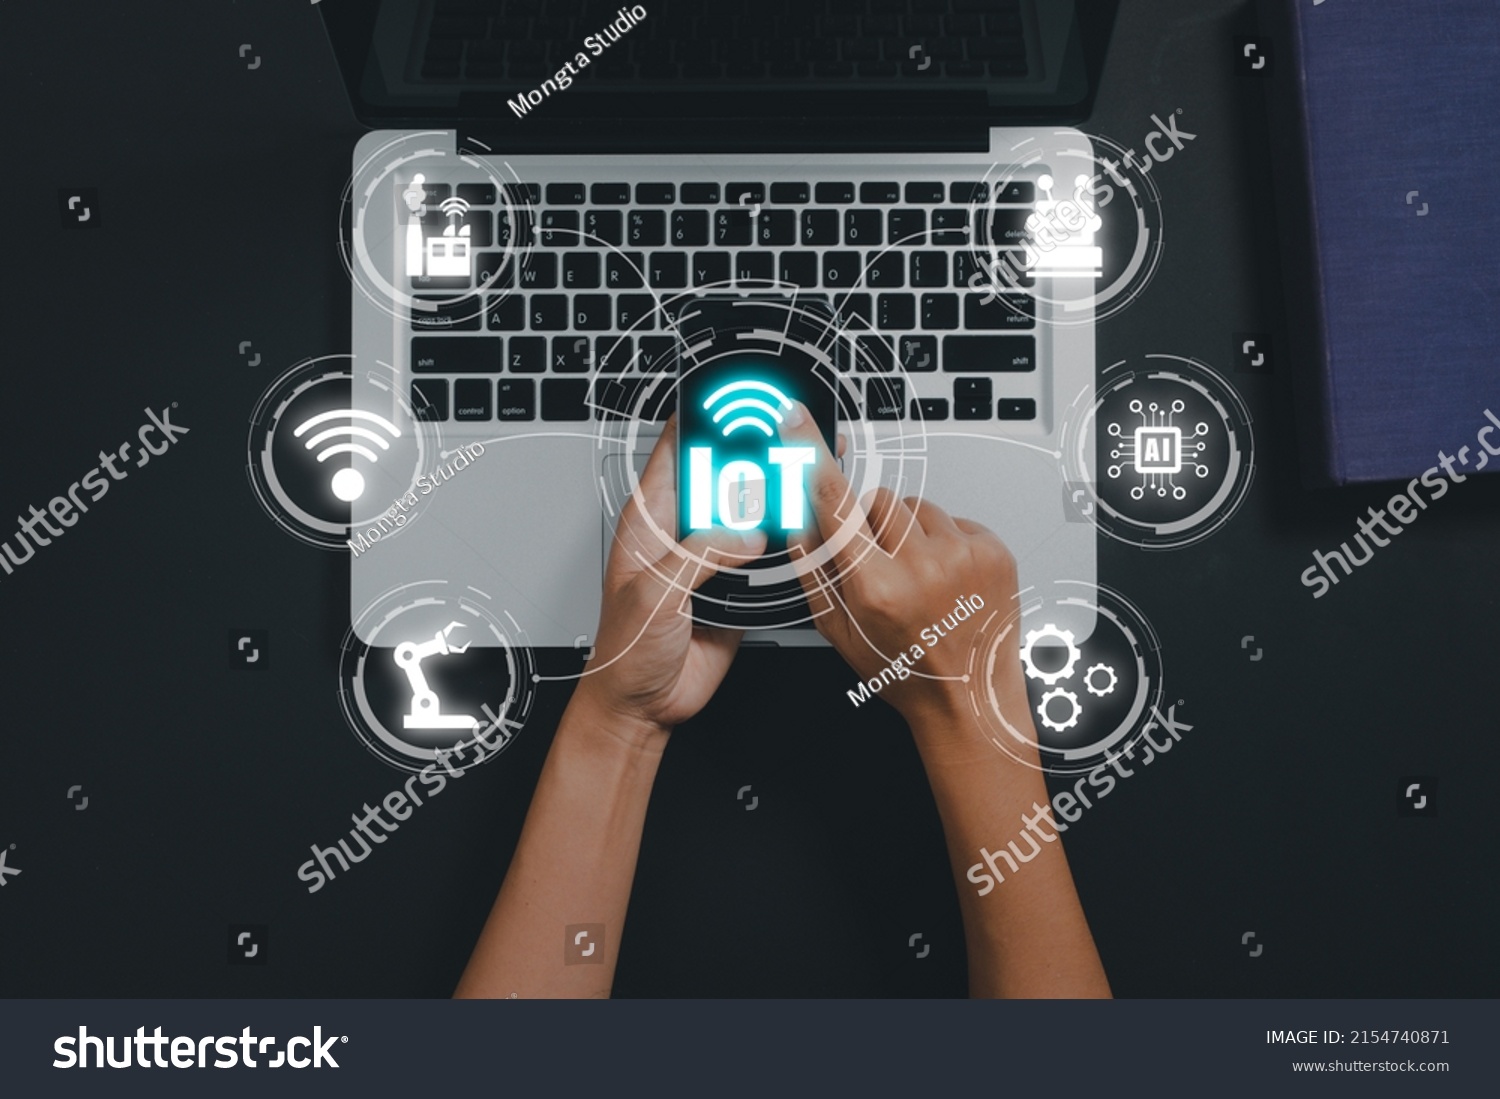 IOT Internet of things, Person hand using smart phone with VR screen Internet of things icon background, Digital transformation, Modern technology concept, Top view. #2154740871